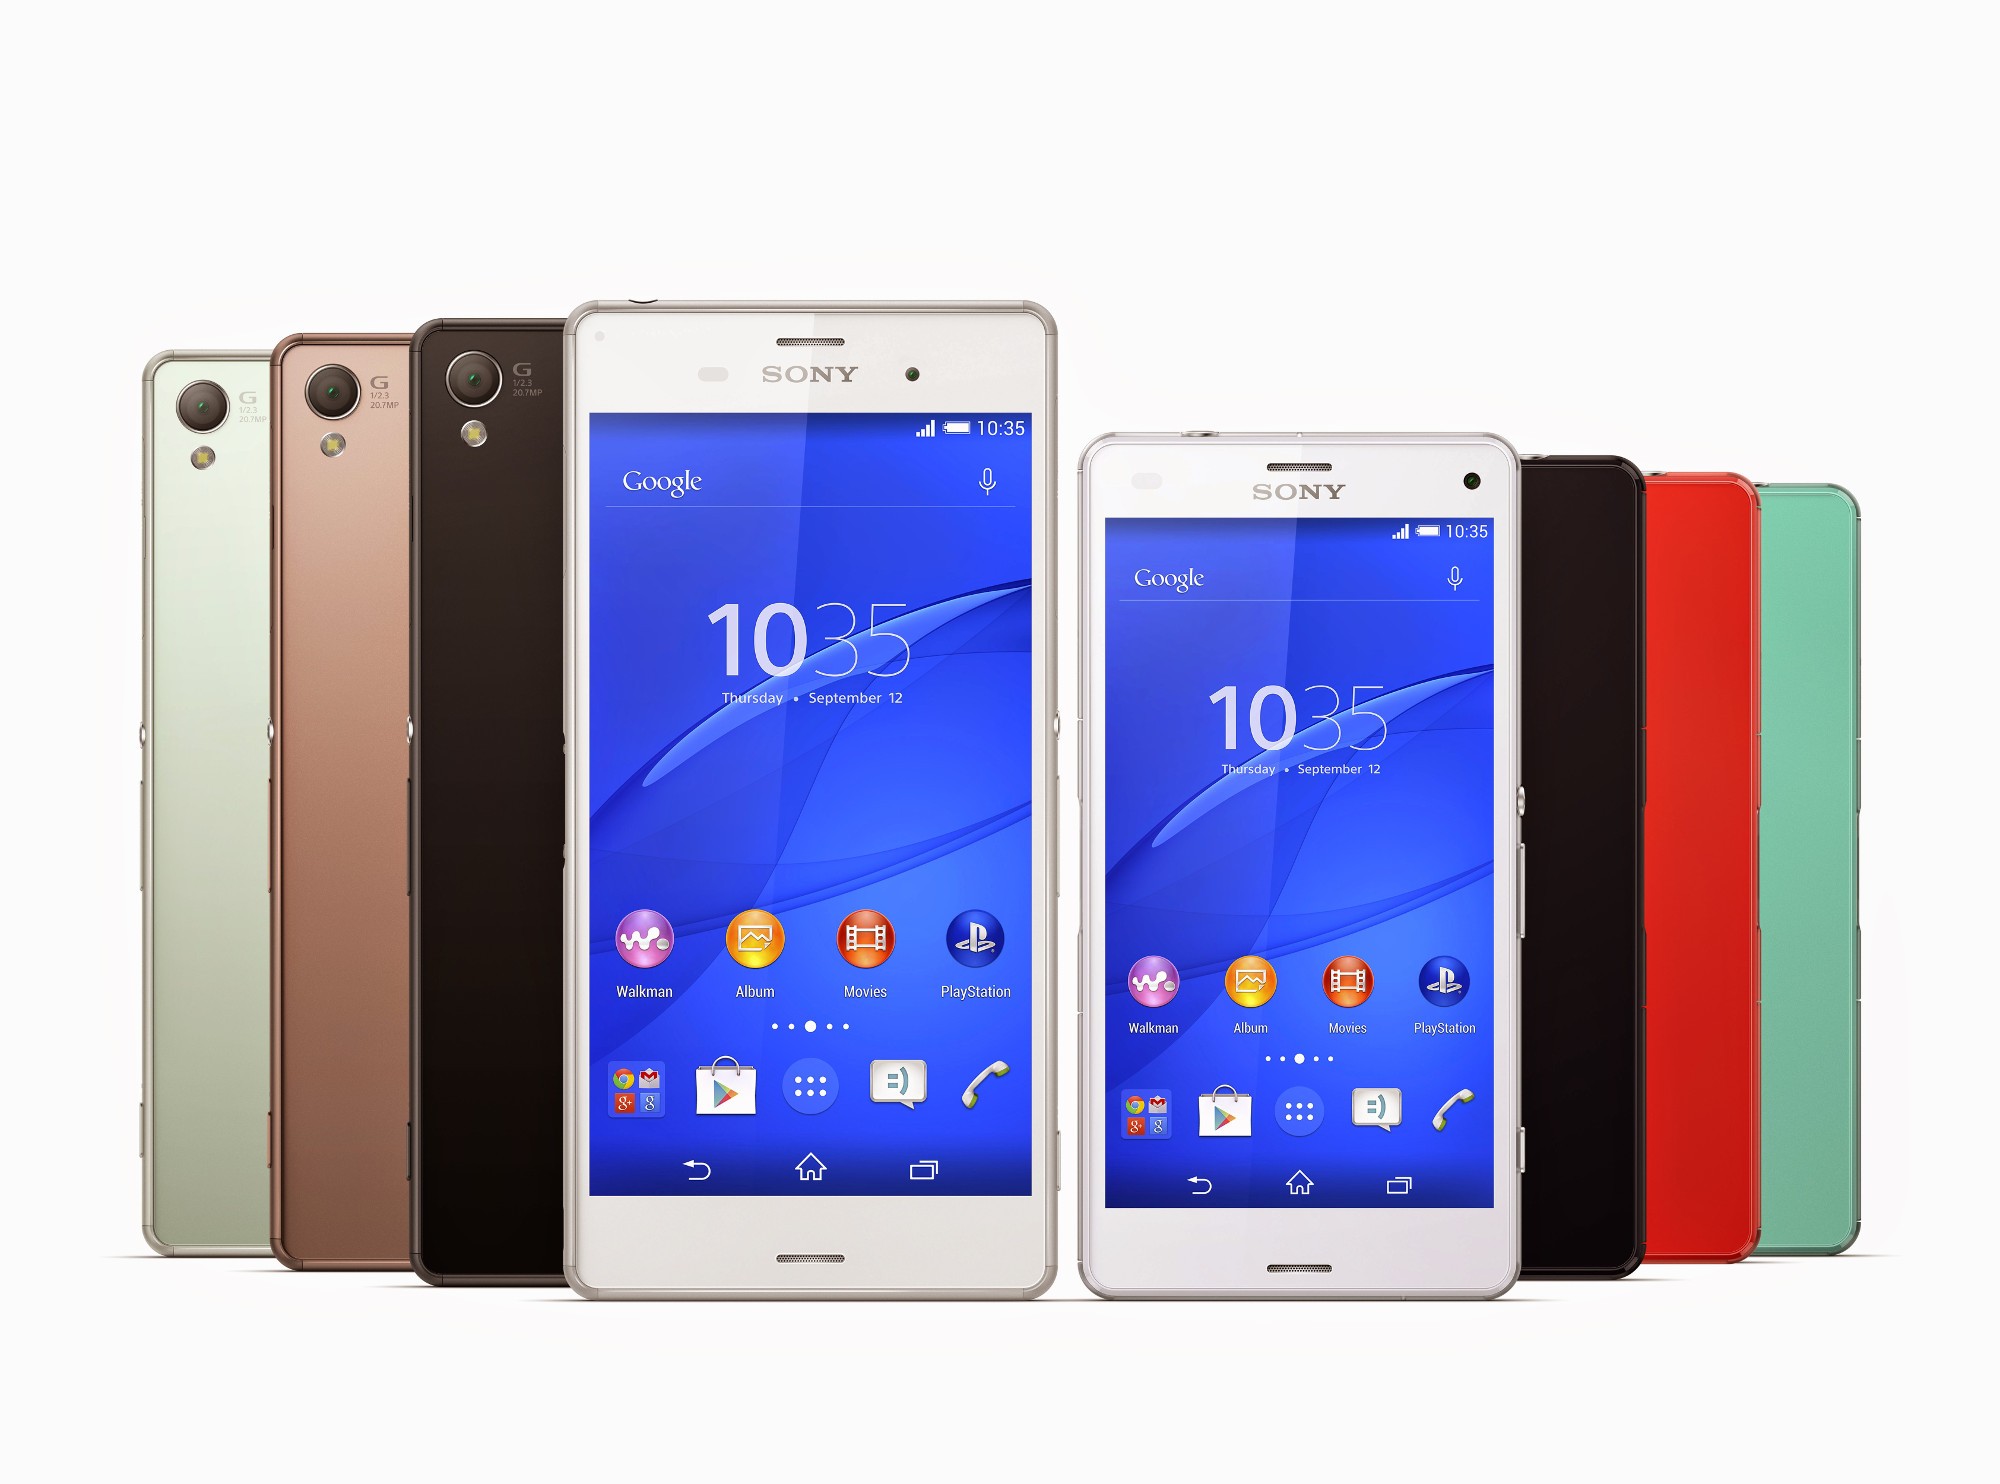 IFA 2014: Sony Xperia Z3 and Xperia Z3 Compact Officially Unveiled